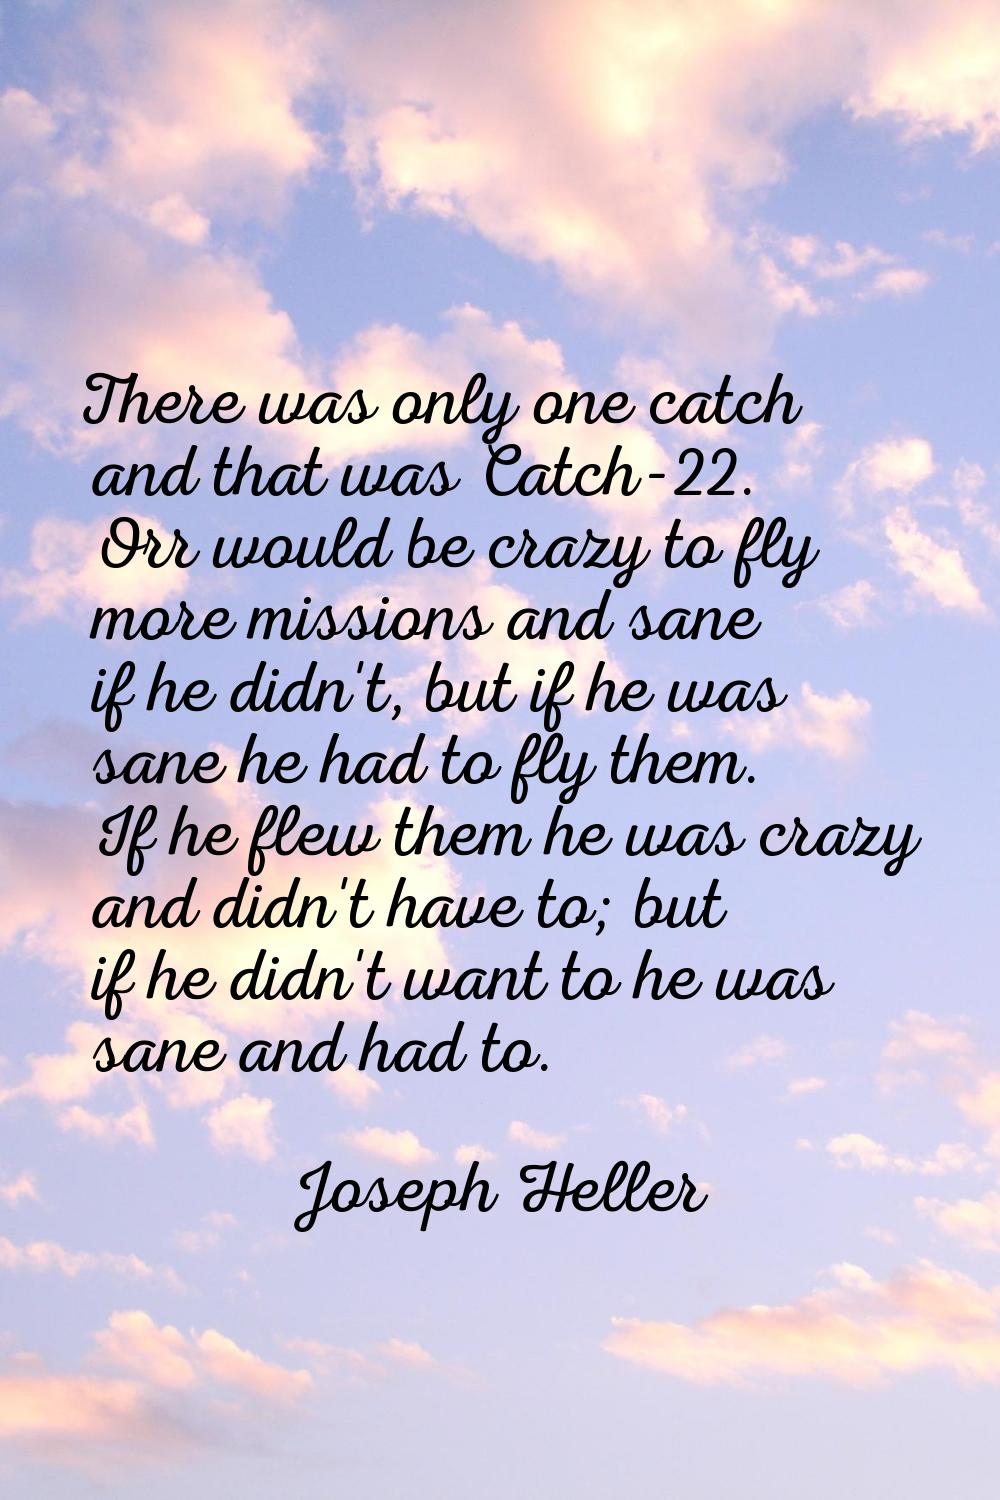 There was only one catch and that was Catch-22. Orr would be crazy to fly more missions and sane if